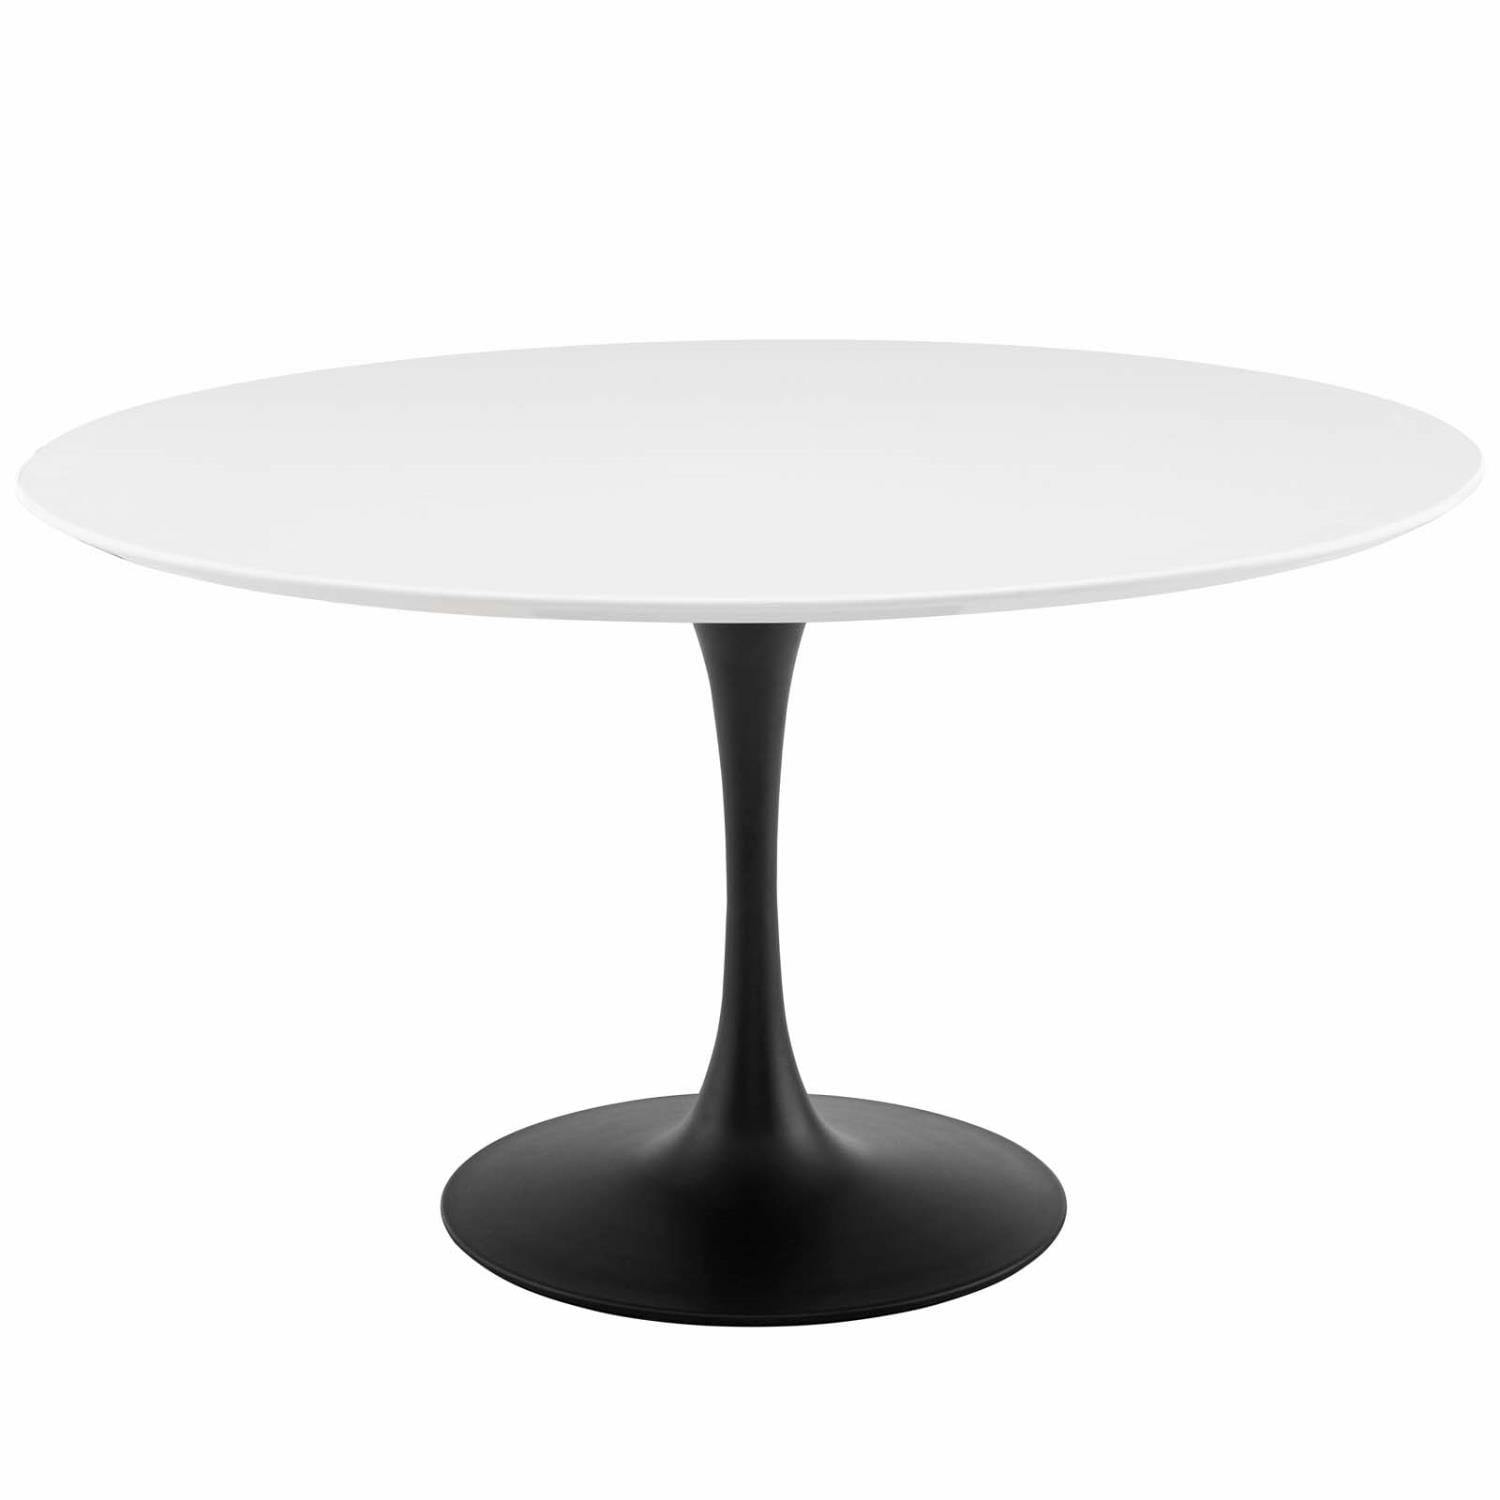 Mid-Century Modern 54" Round Wood Dining Table in Black & White